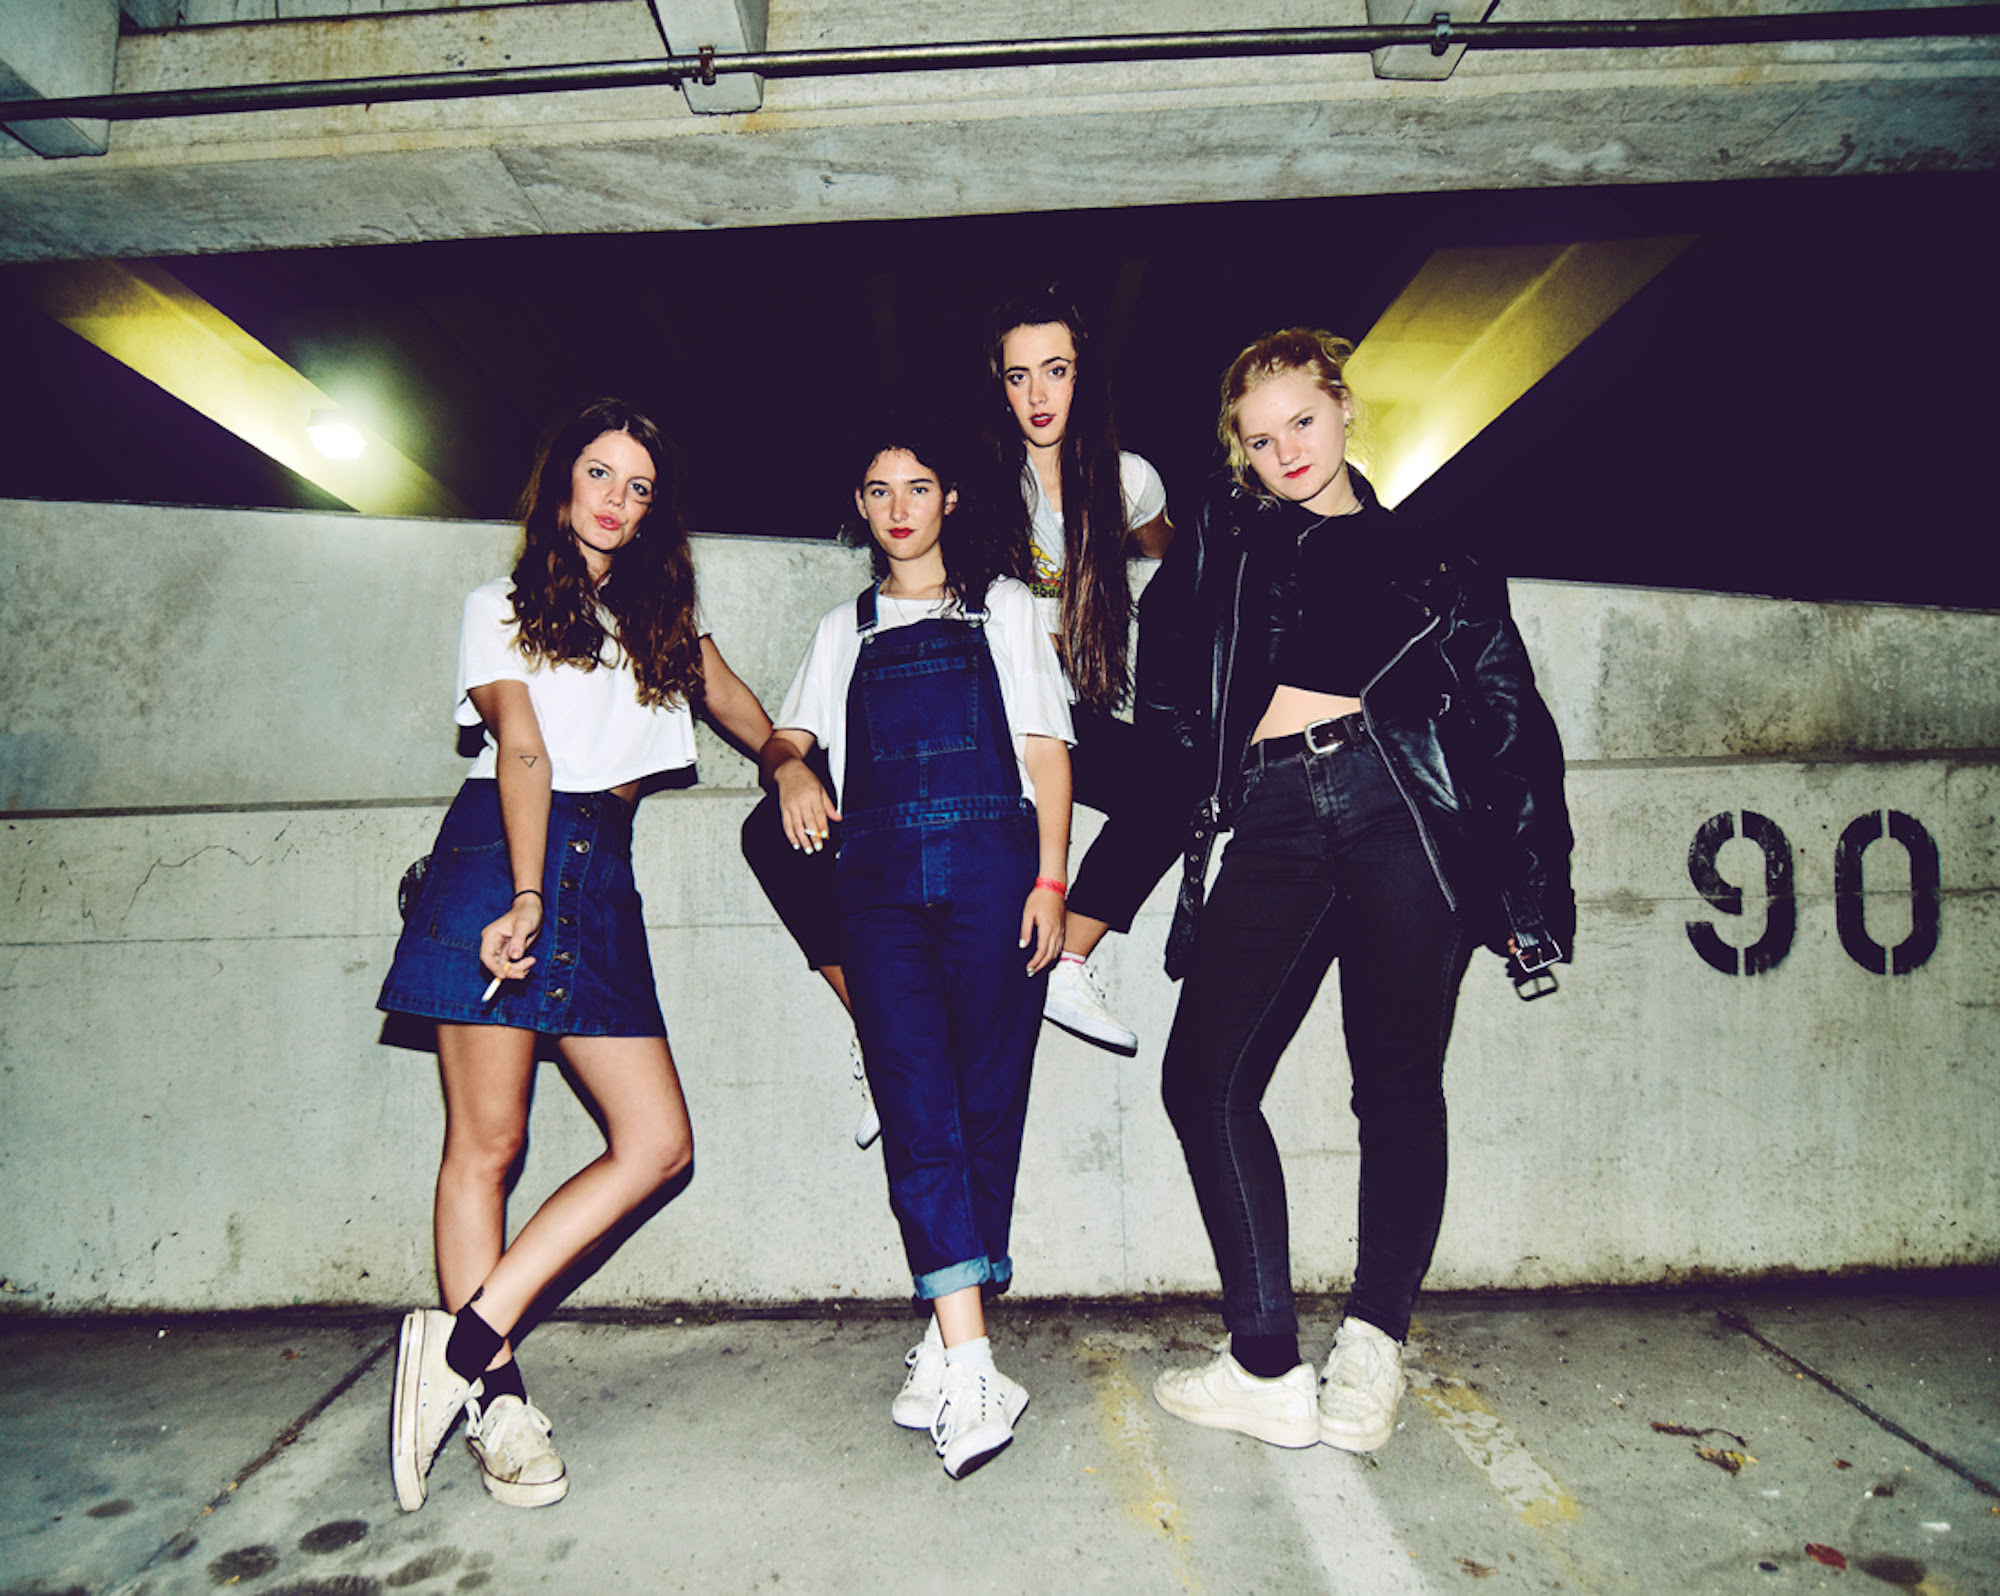 HINDS unveil video for "Garden", announce new European Tour Dates, starting October 31st in Paris.